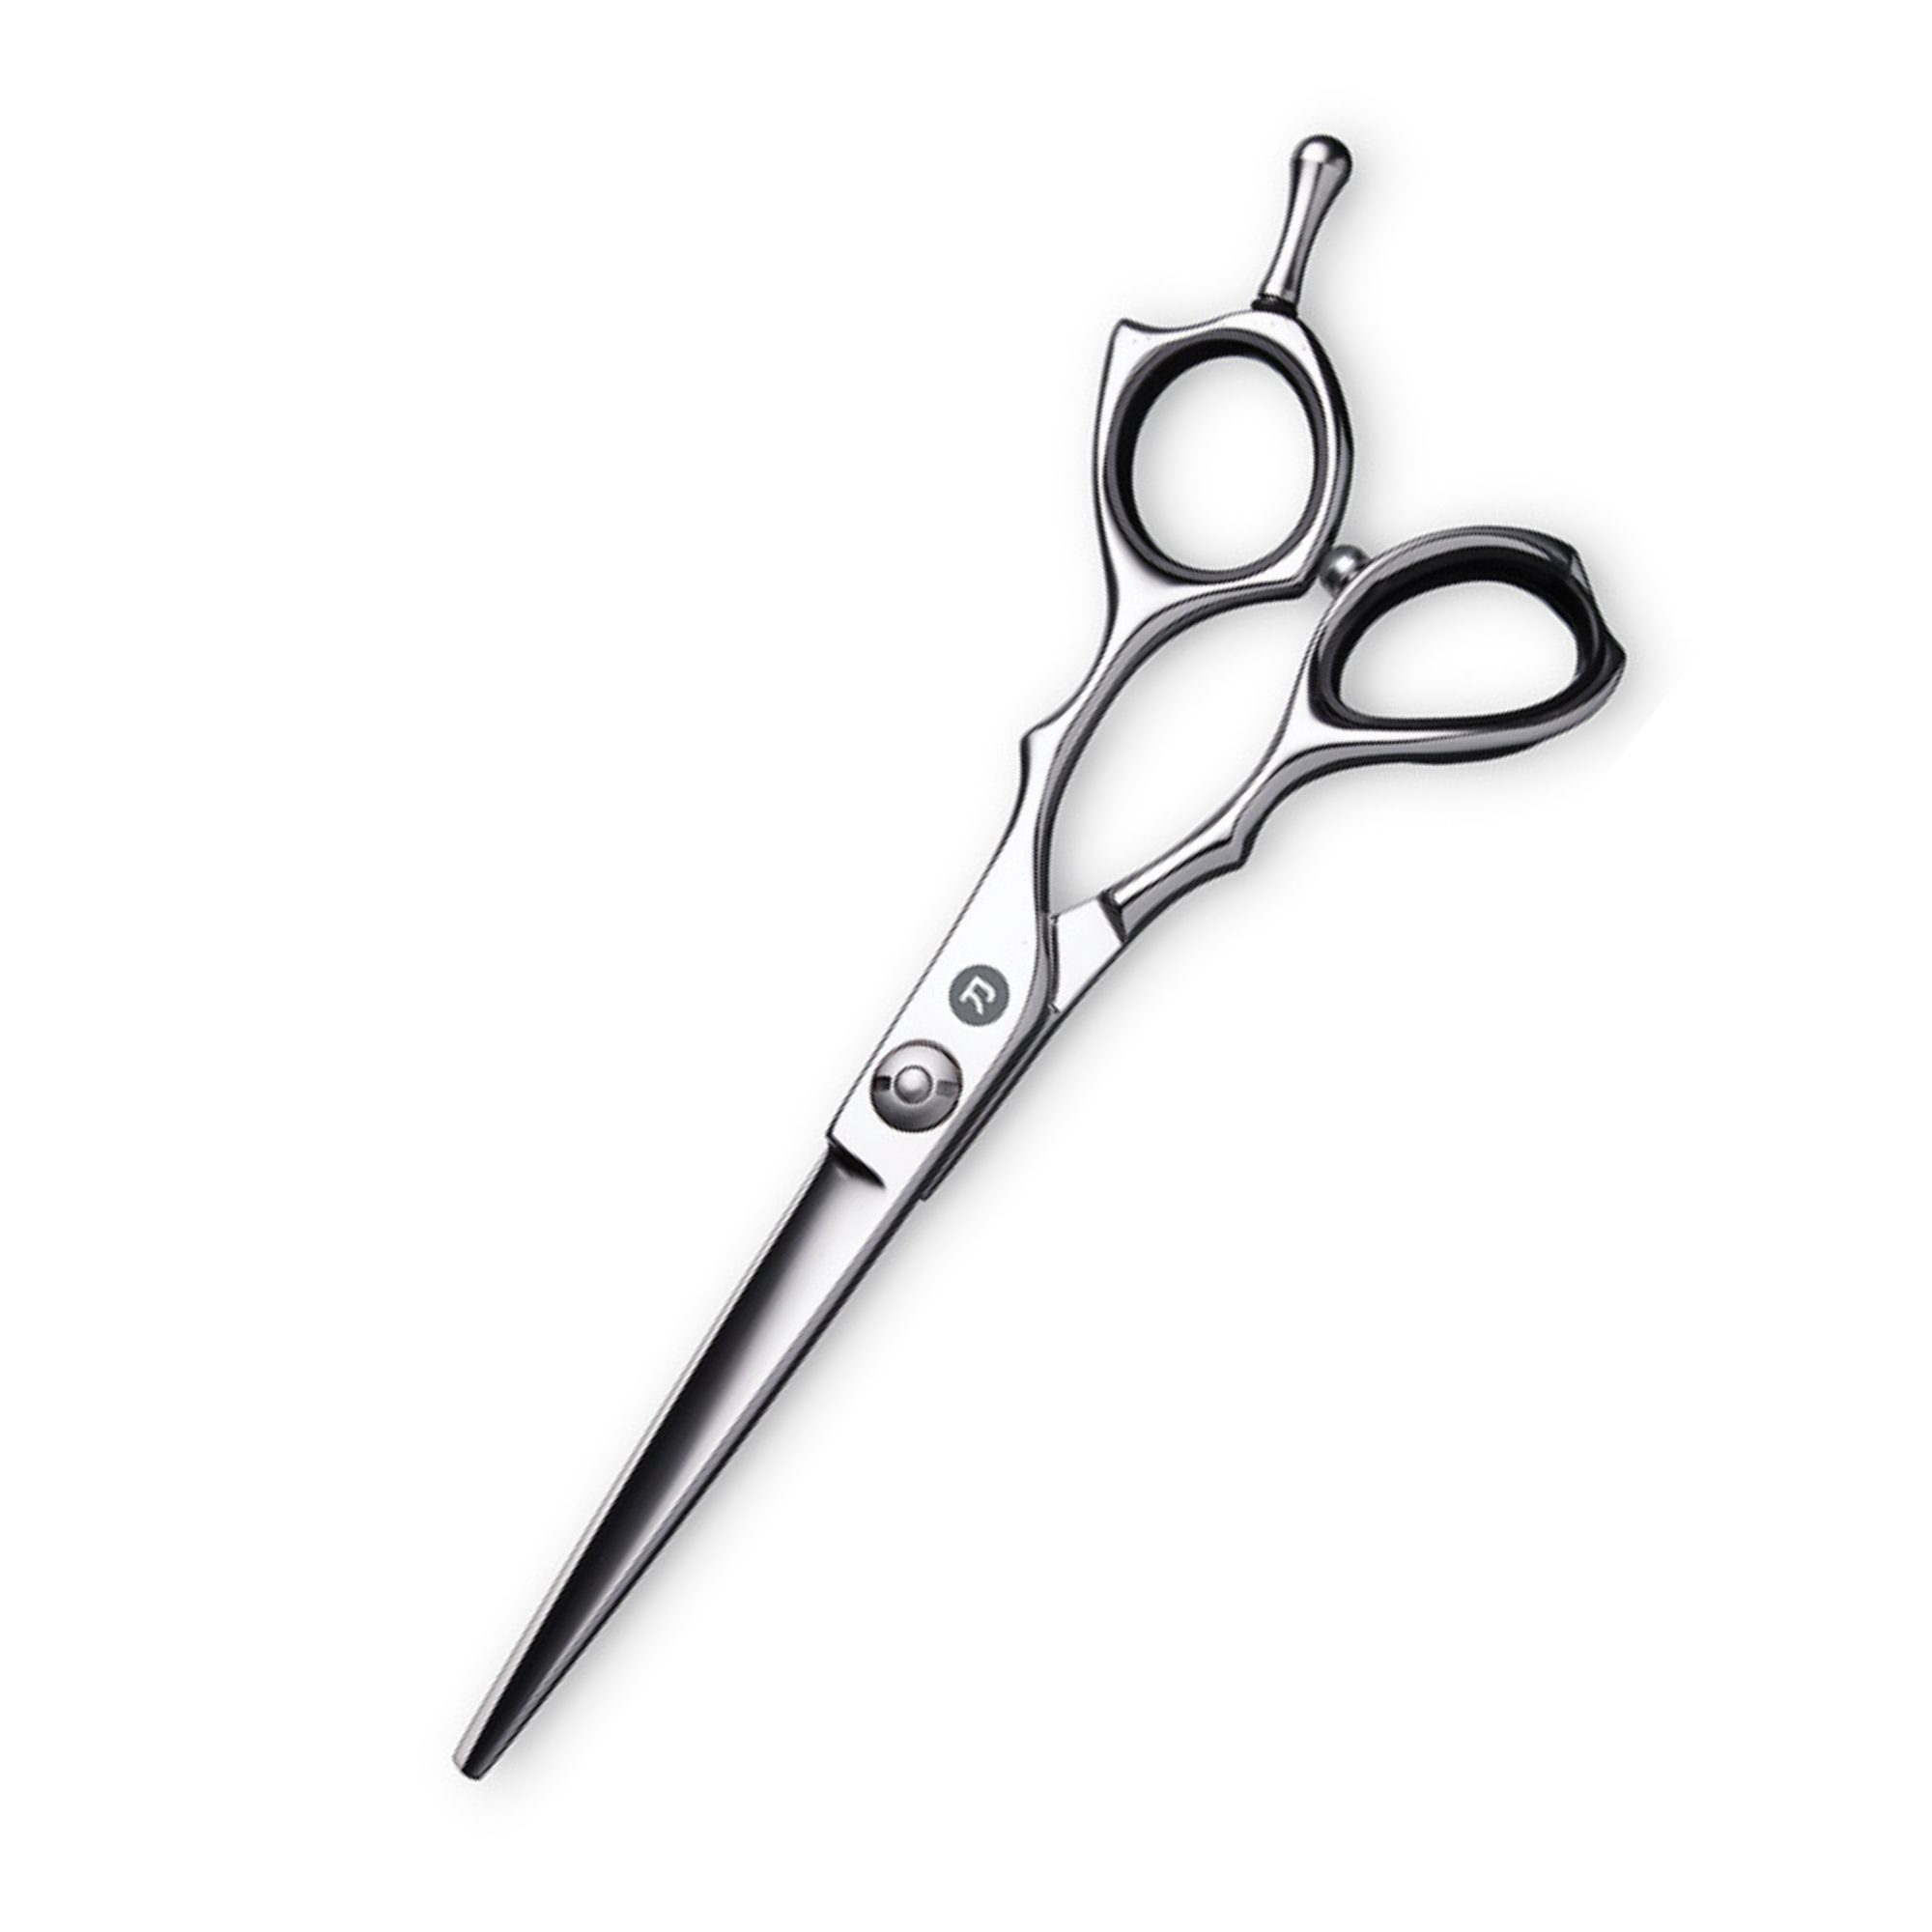 Professional Hair Scissors 5 Inch with Extremely Sharp Blades, 440C Steel  Hair Cutting Scissors, Durable, Smooth Motion & Fine Cut, Barber Scissors